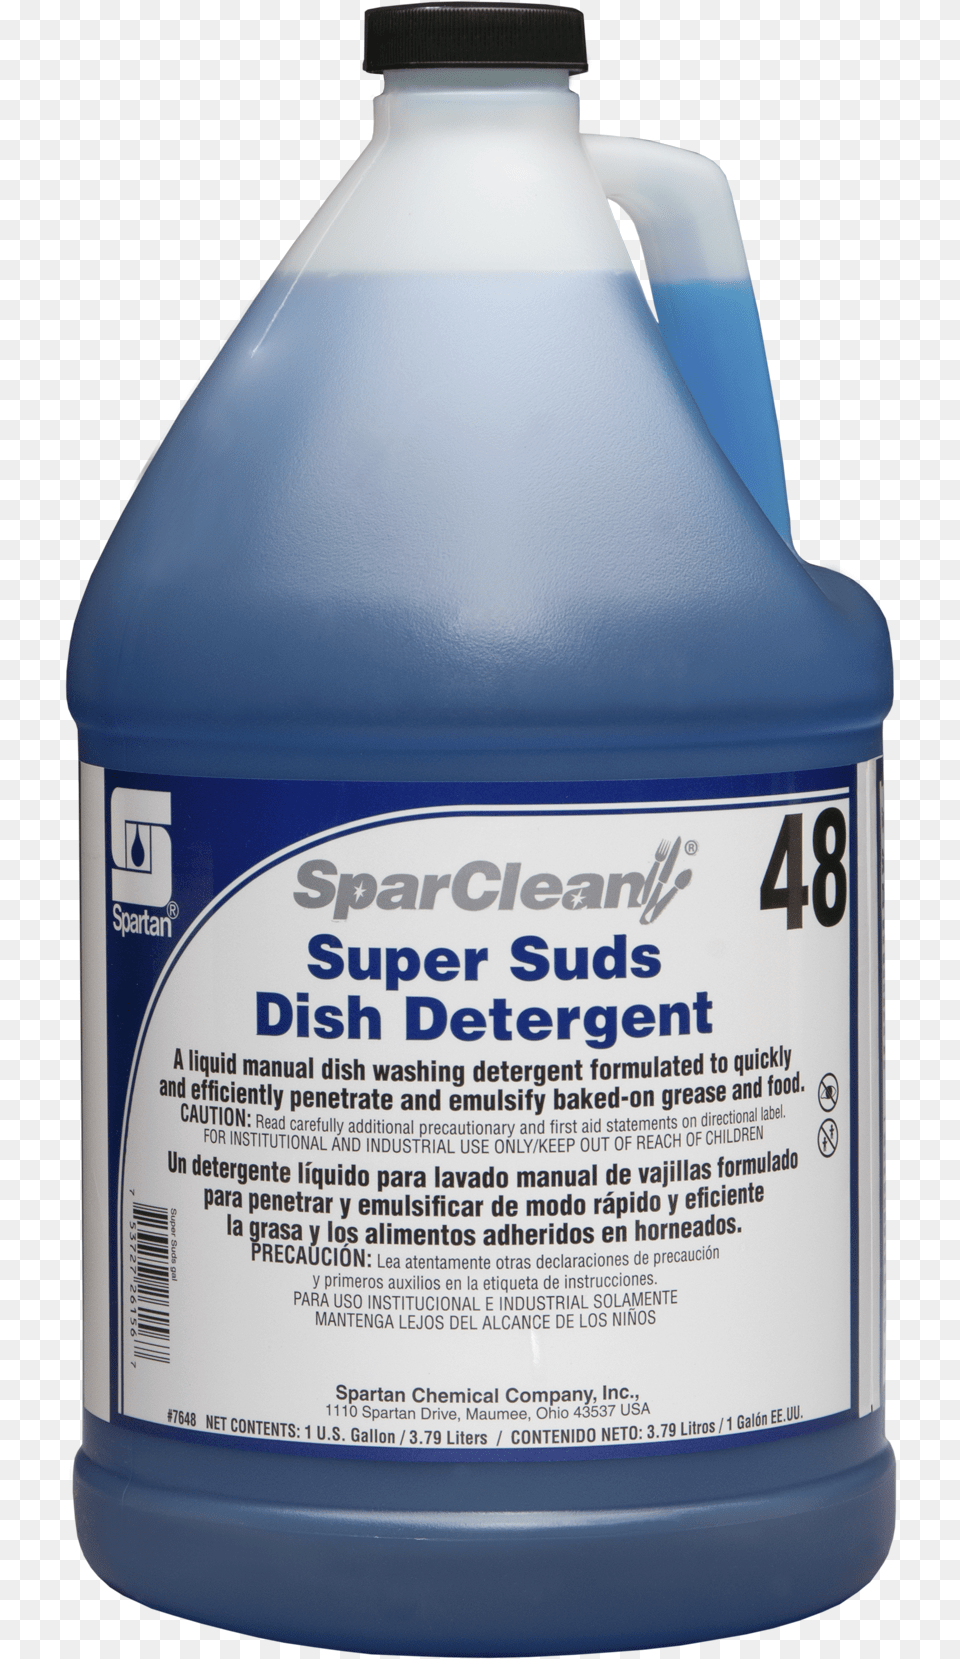 Sparclean Super Suds Spartan Chemical Company Inc, Bottle, Food, Seasoning, Syrup Free Png